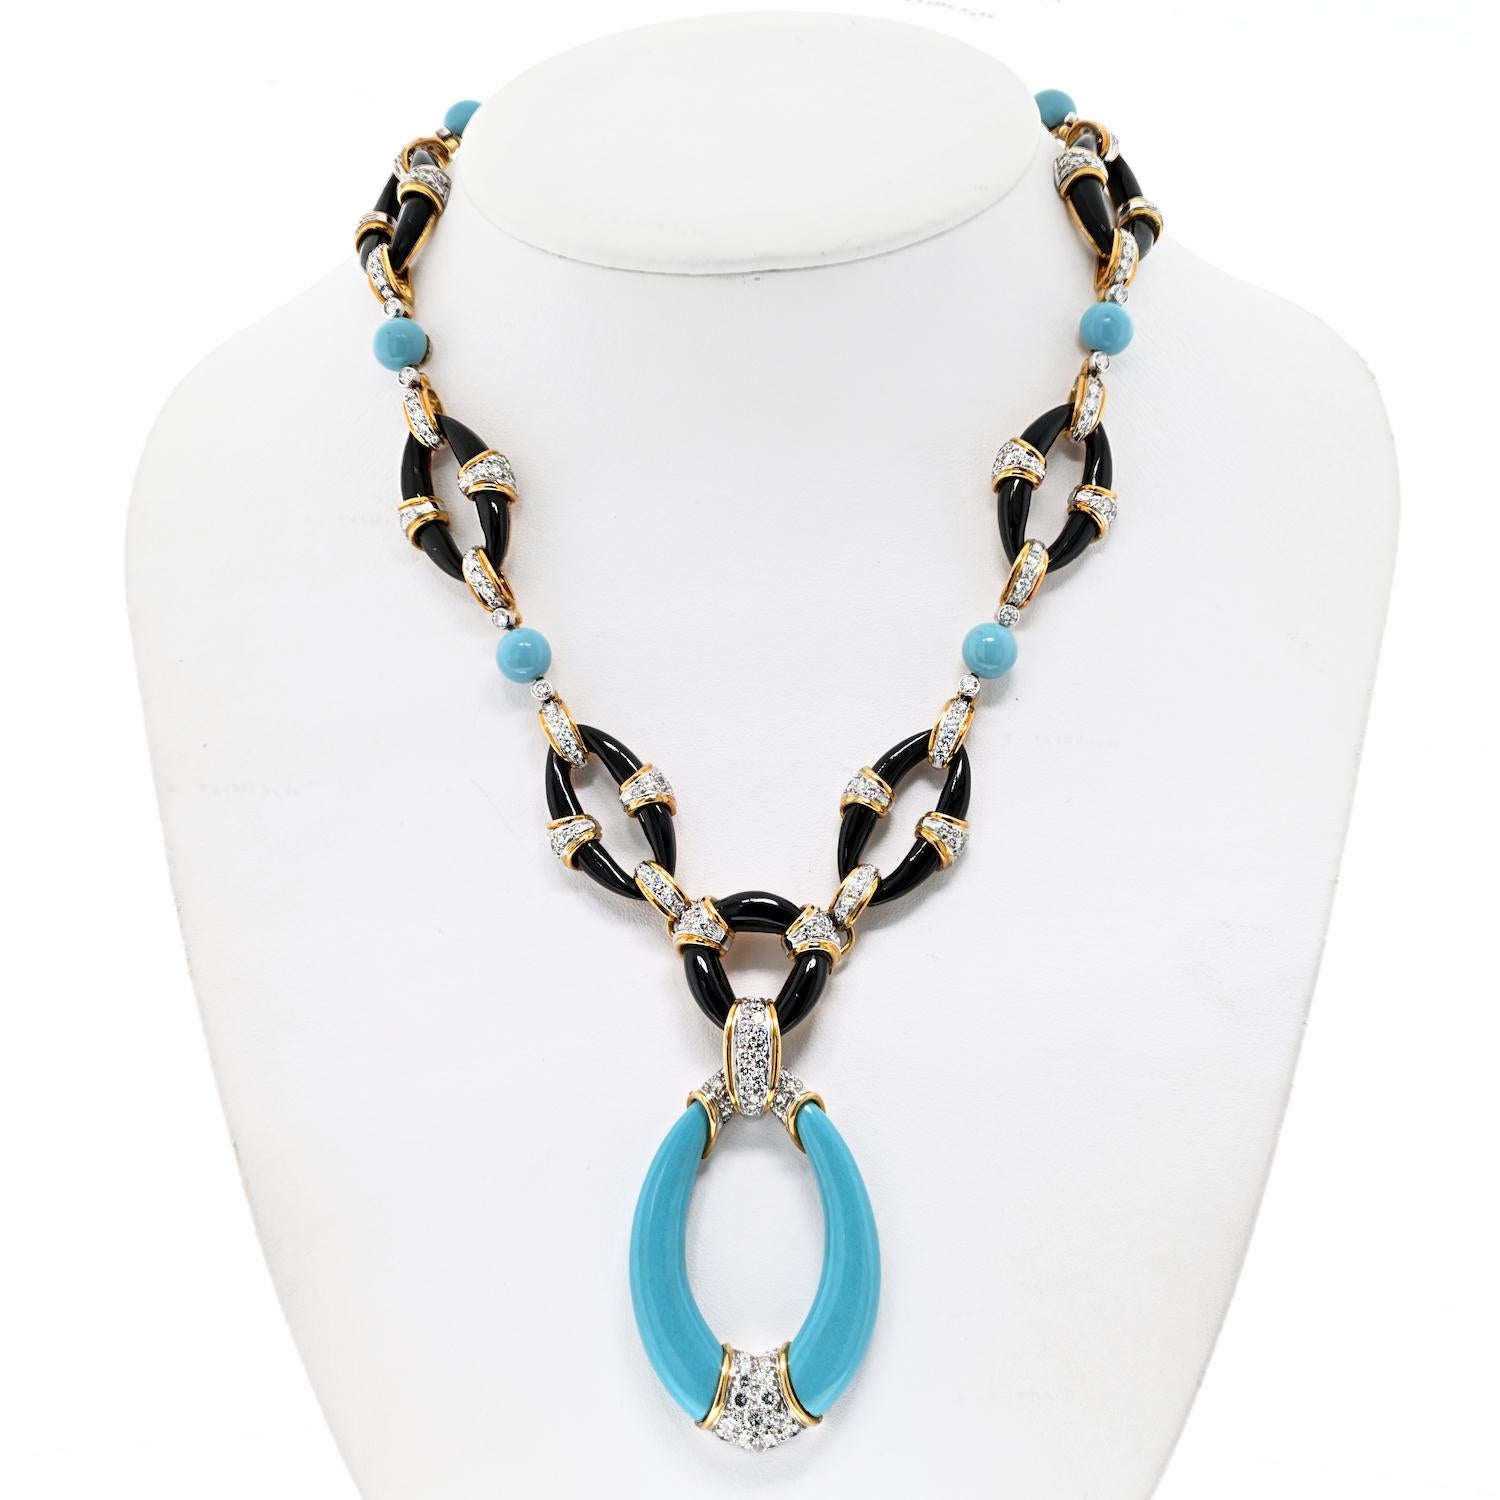 Elevate your style with the Kutchinsky Black Onyx, Reconstituted Turquoise, and Diamond Pendant-Necklace, a stunning piece that seamlessly combines bold design with luxurious gemstones.

The necklace has a length of 17.75 inches, providing a